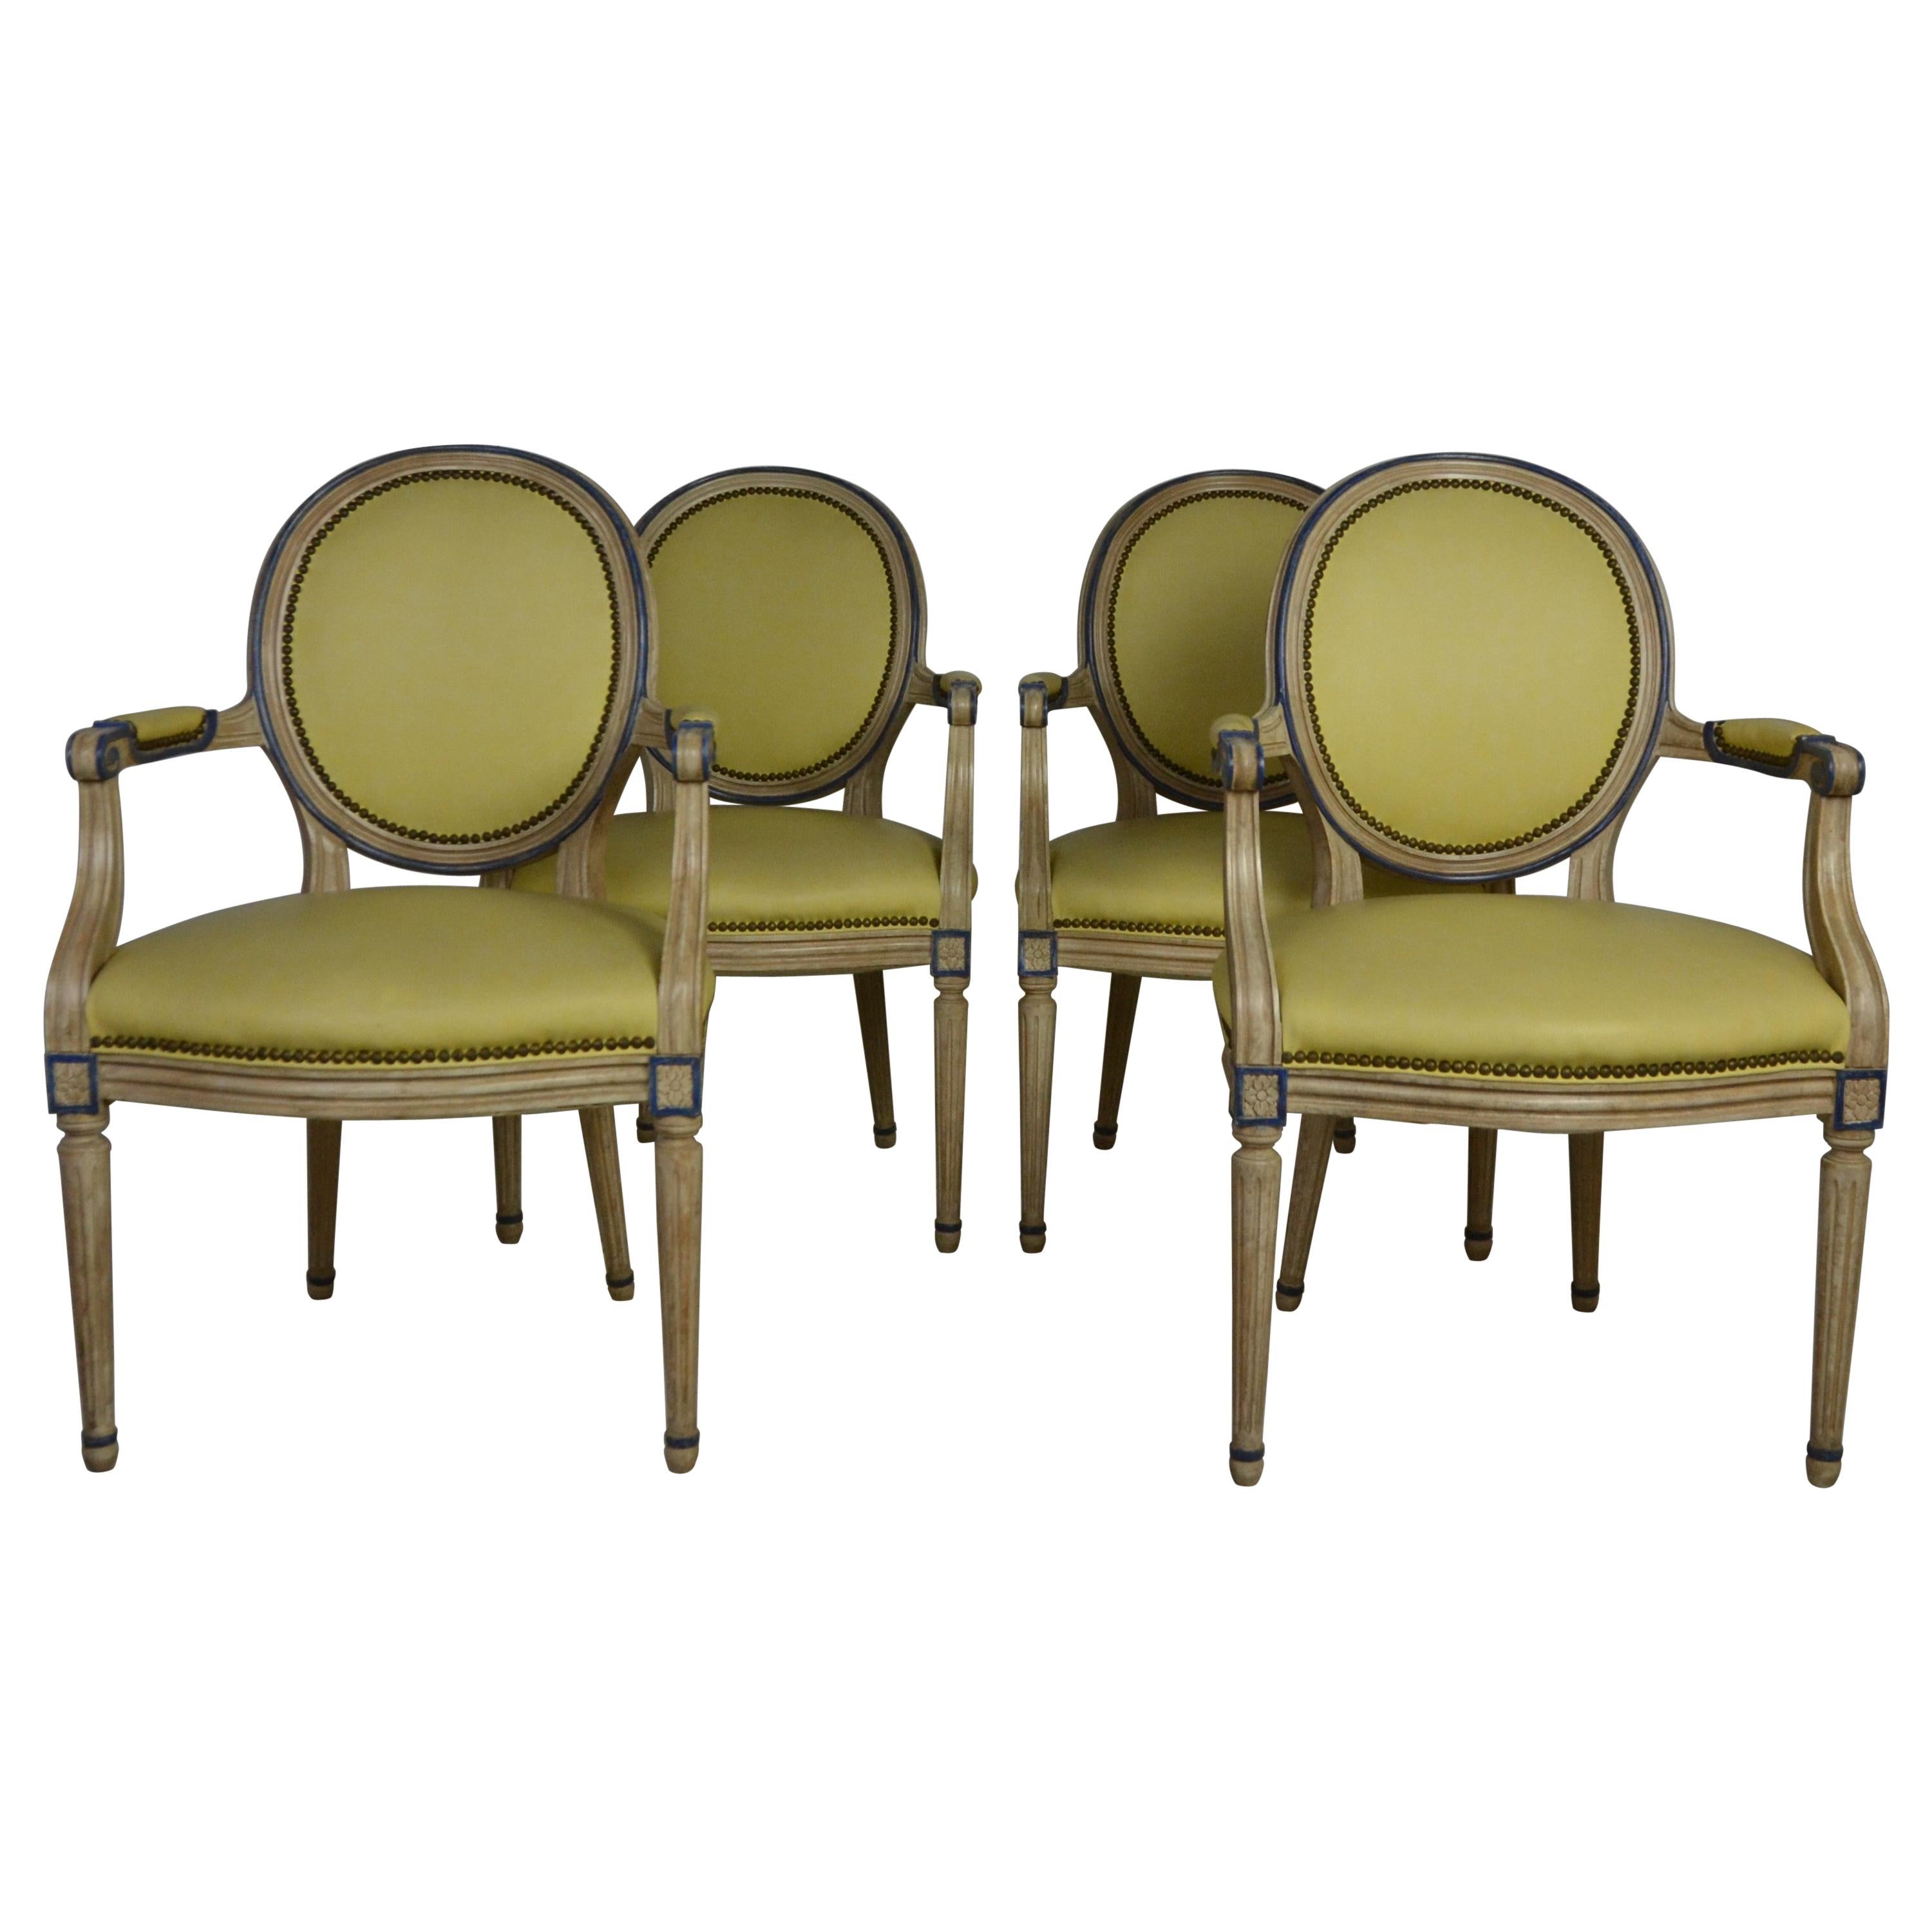 Leather Louis XVI Armchairs / Dining Chairs Set of 4